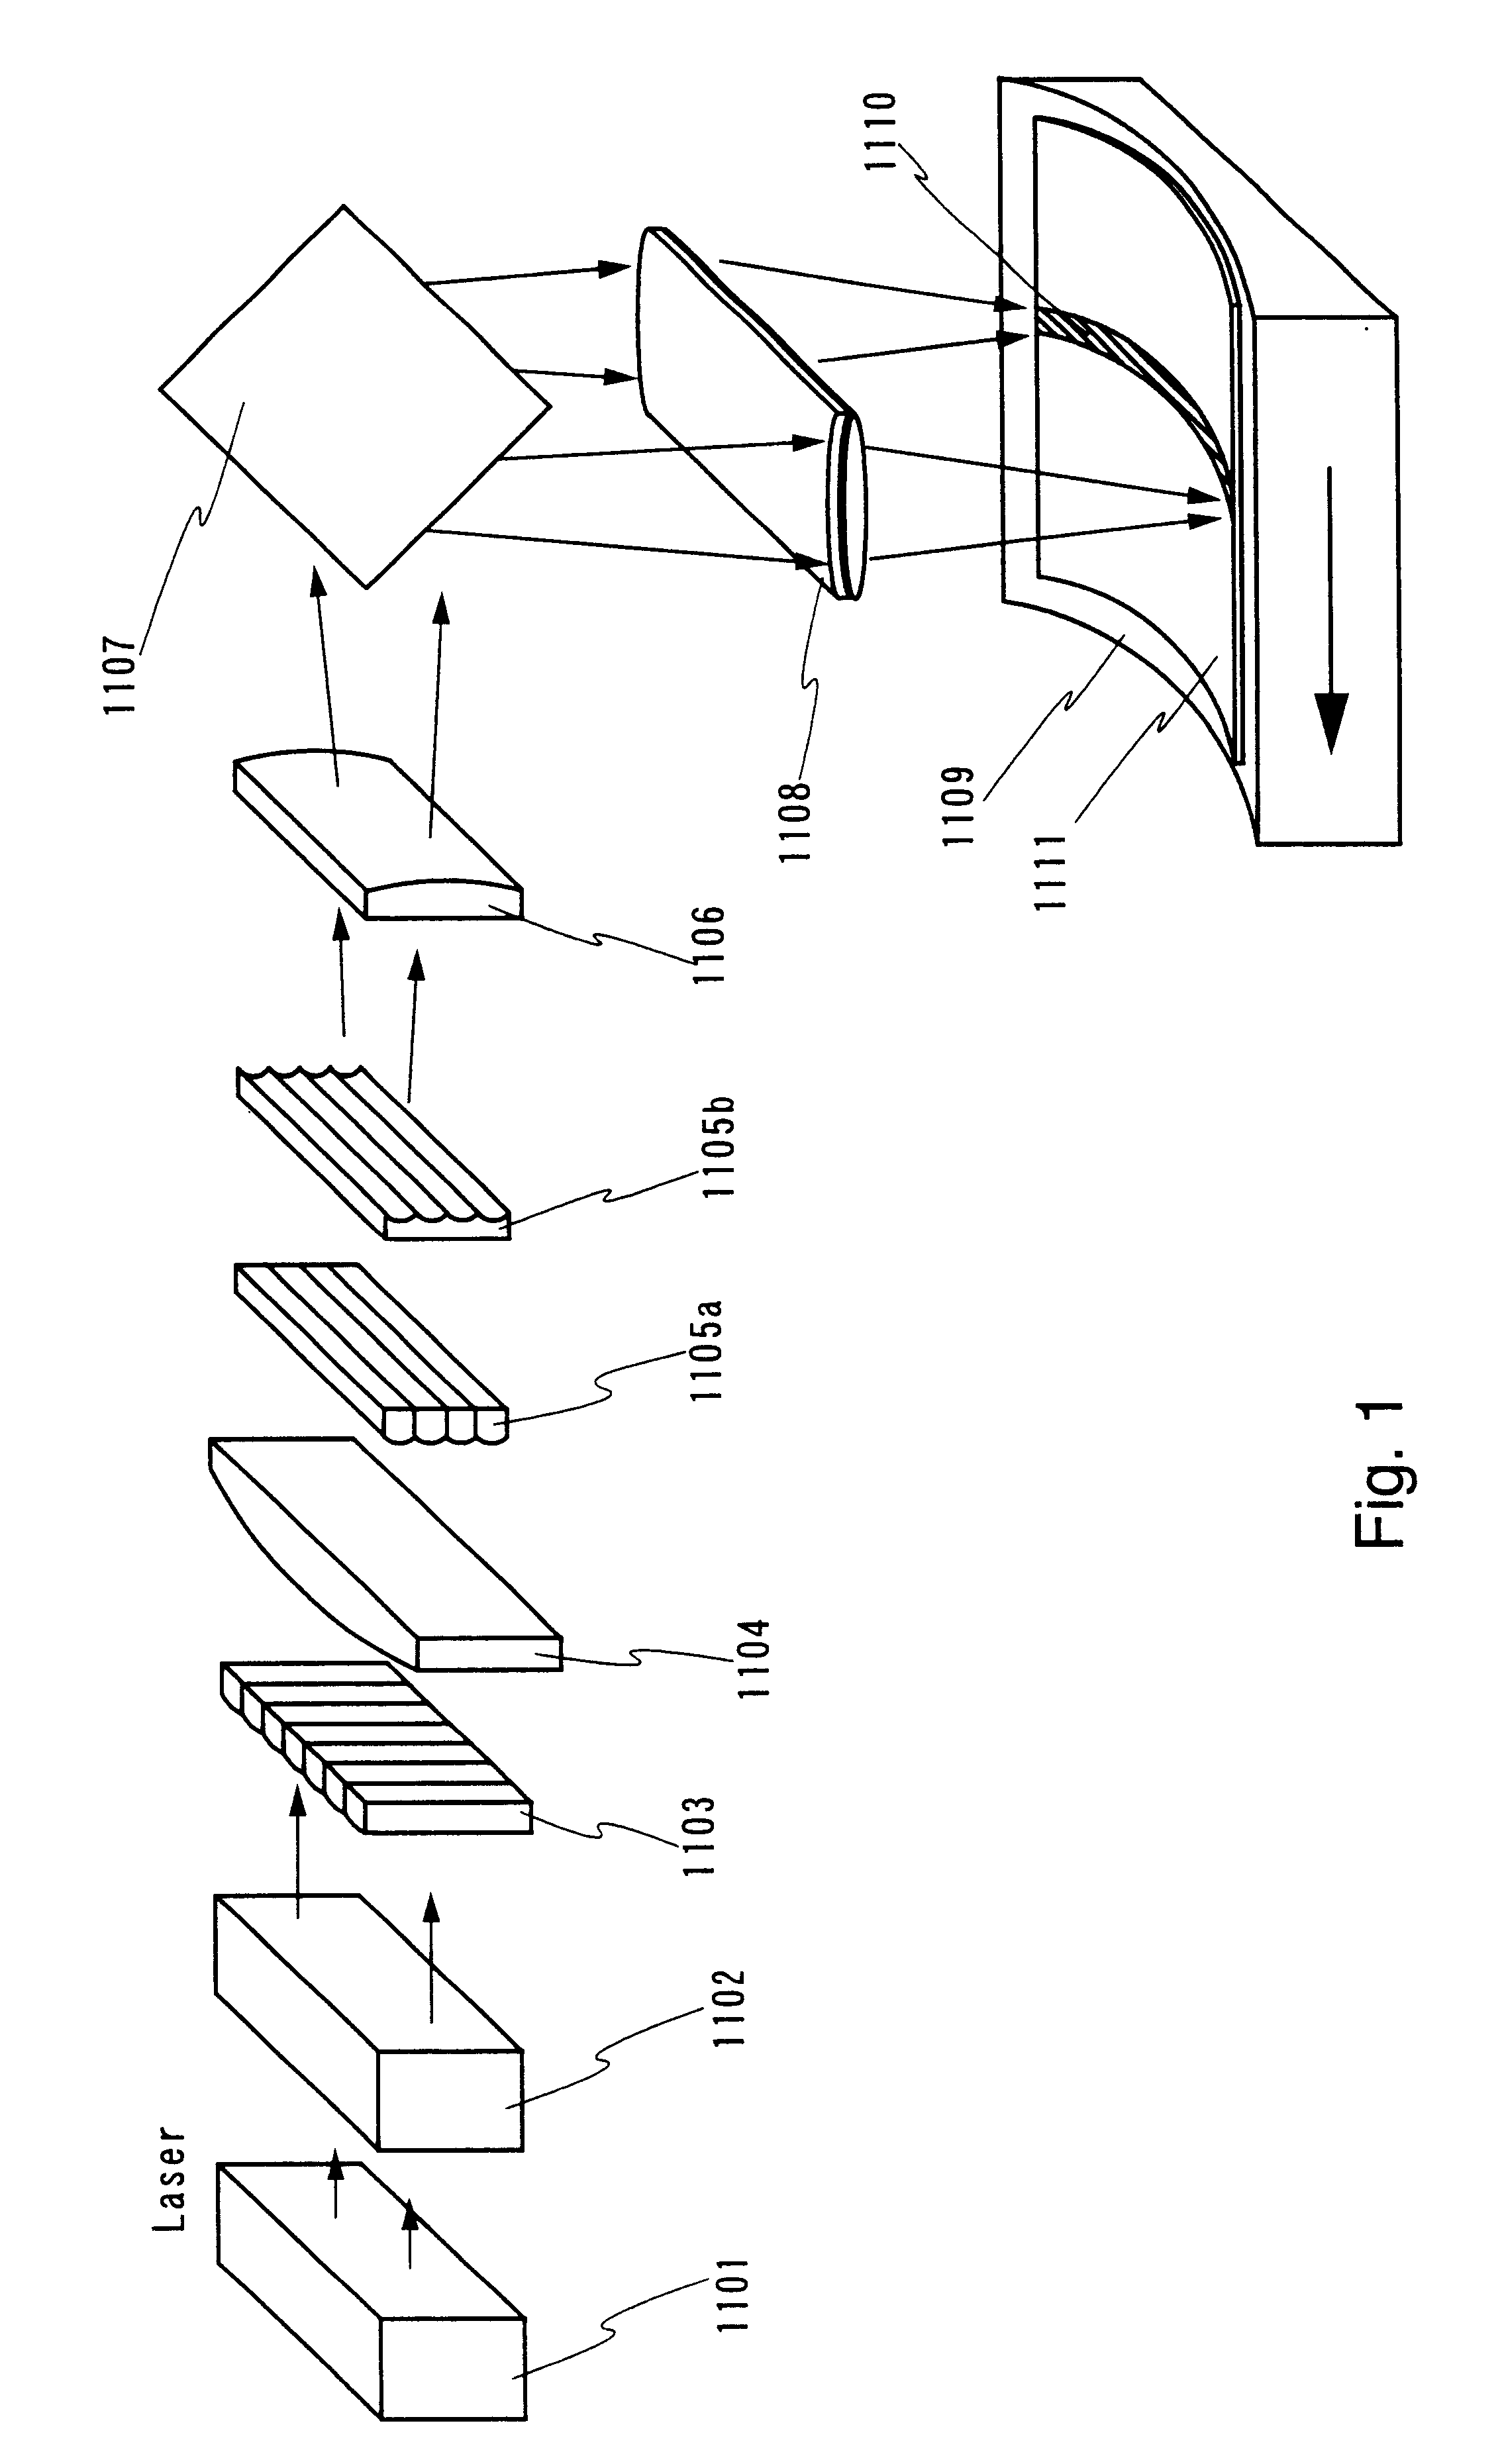 Laser irradiation stage, laser irradiation optical system, laser irradiation apparatus, laser irradiation method, and method of manufacturing a semiconductor device